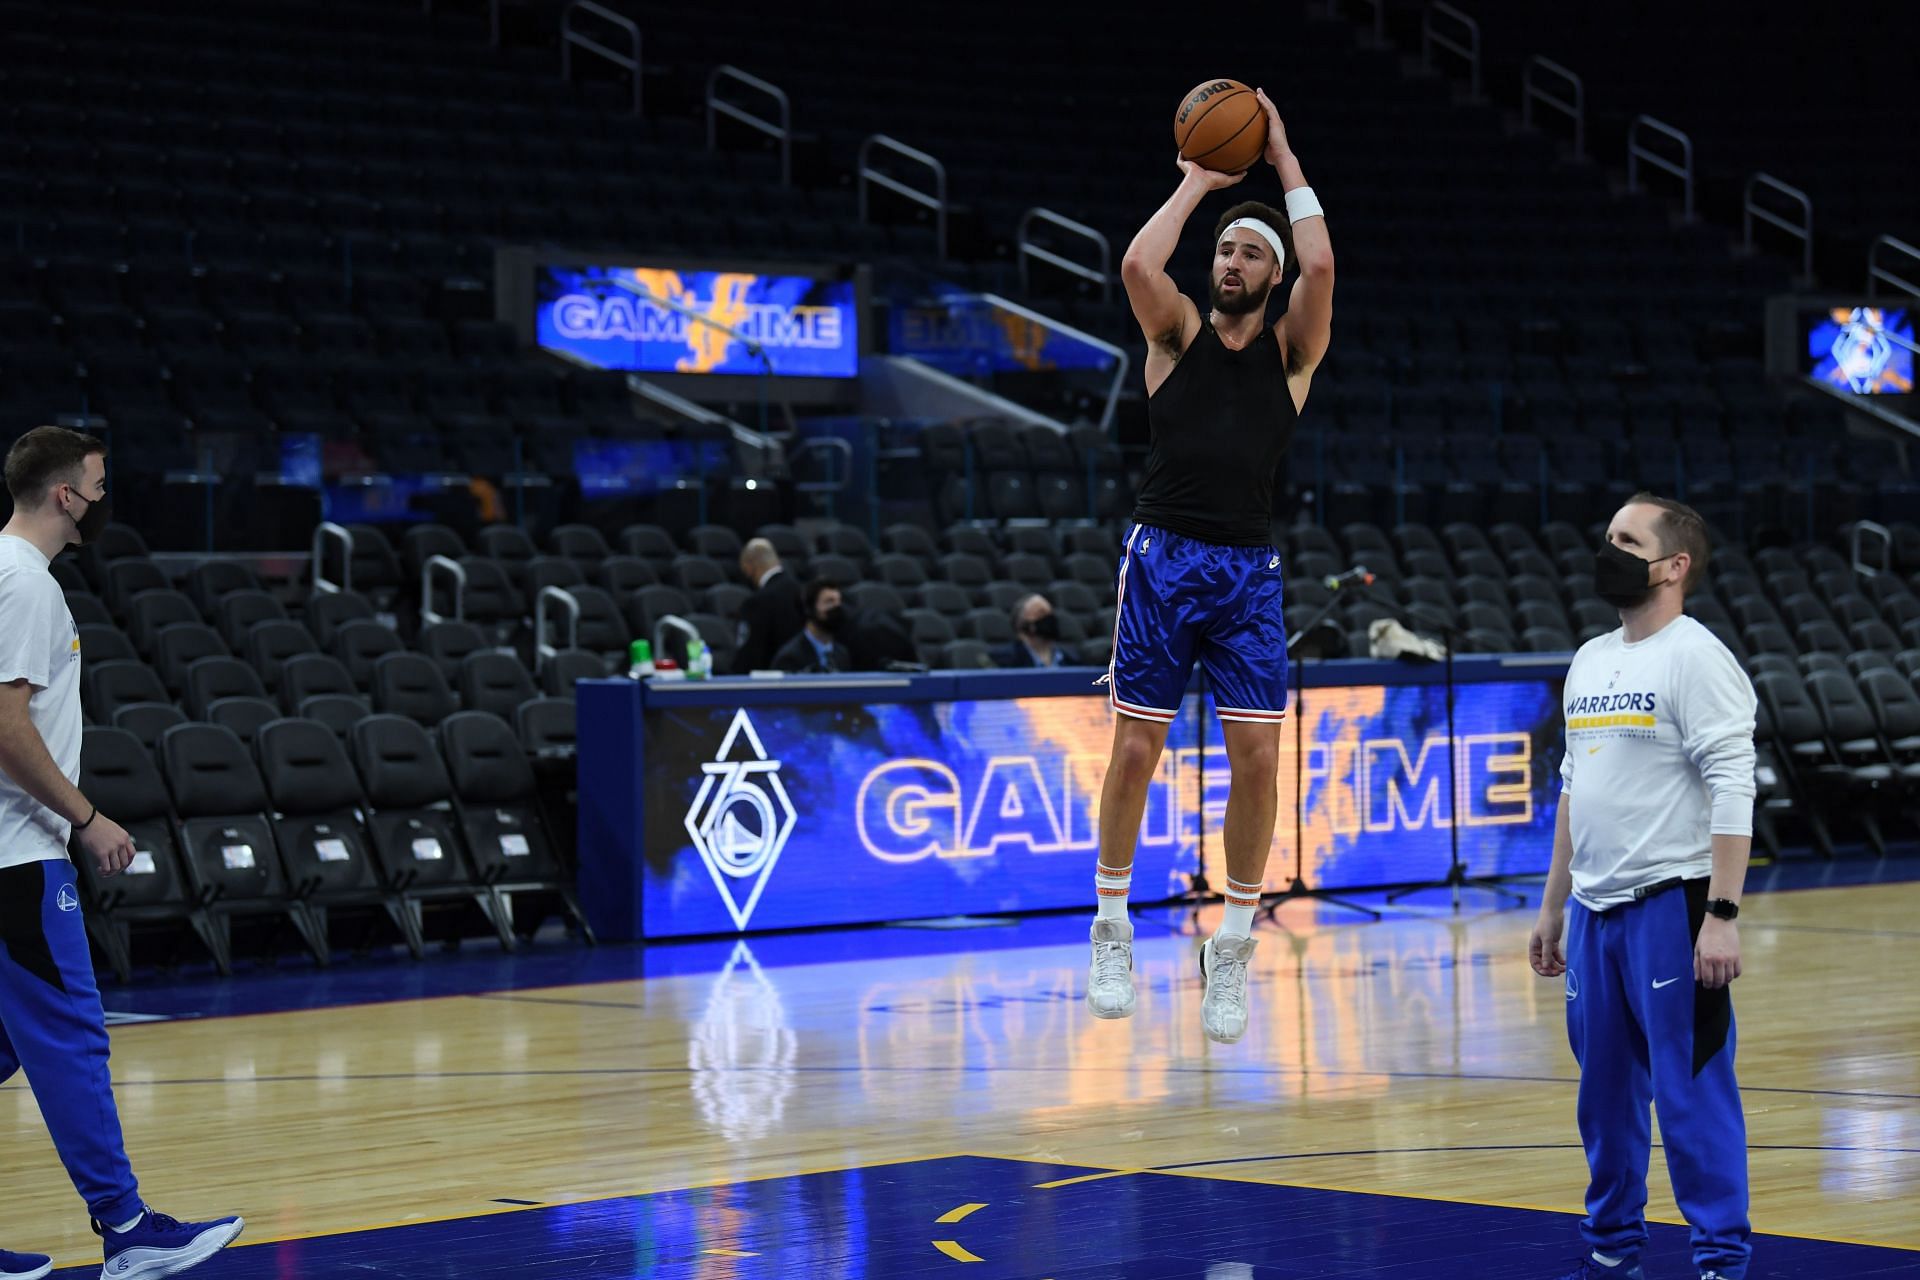 Golden State Warriors Klay Thompson in a shootaround before a game